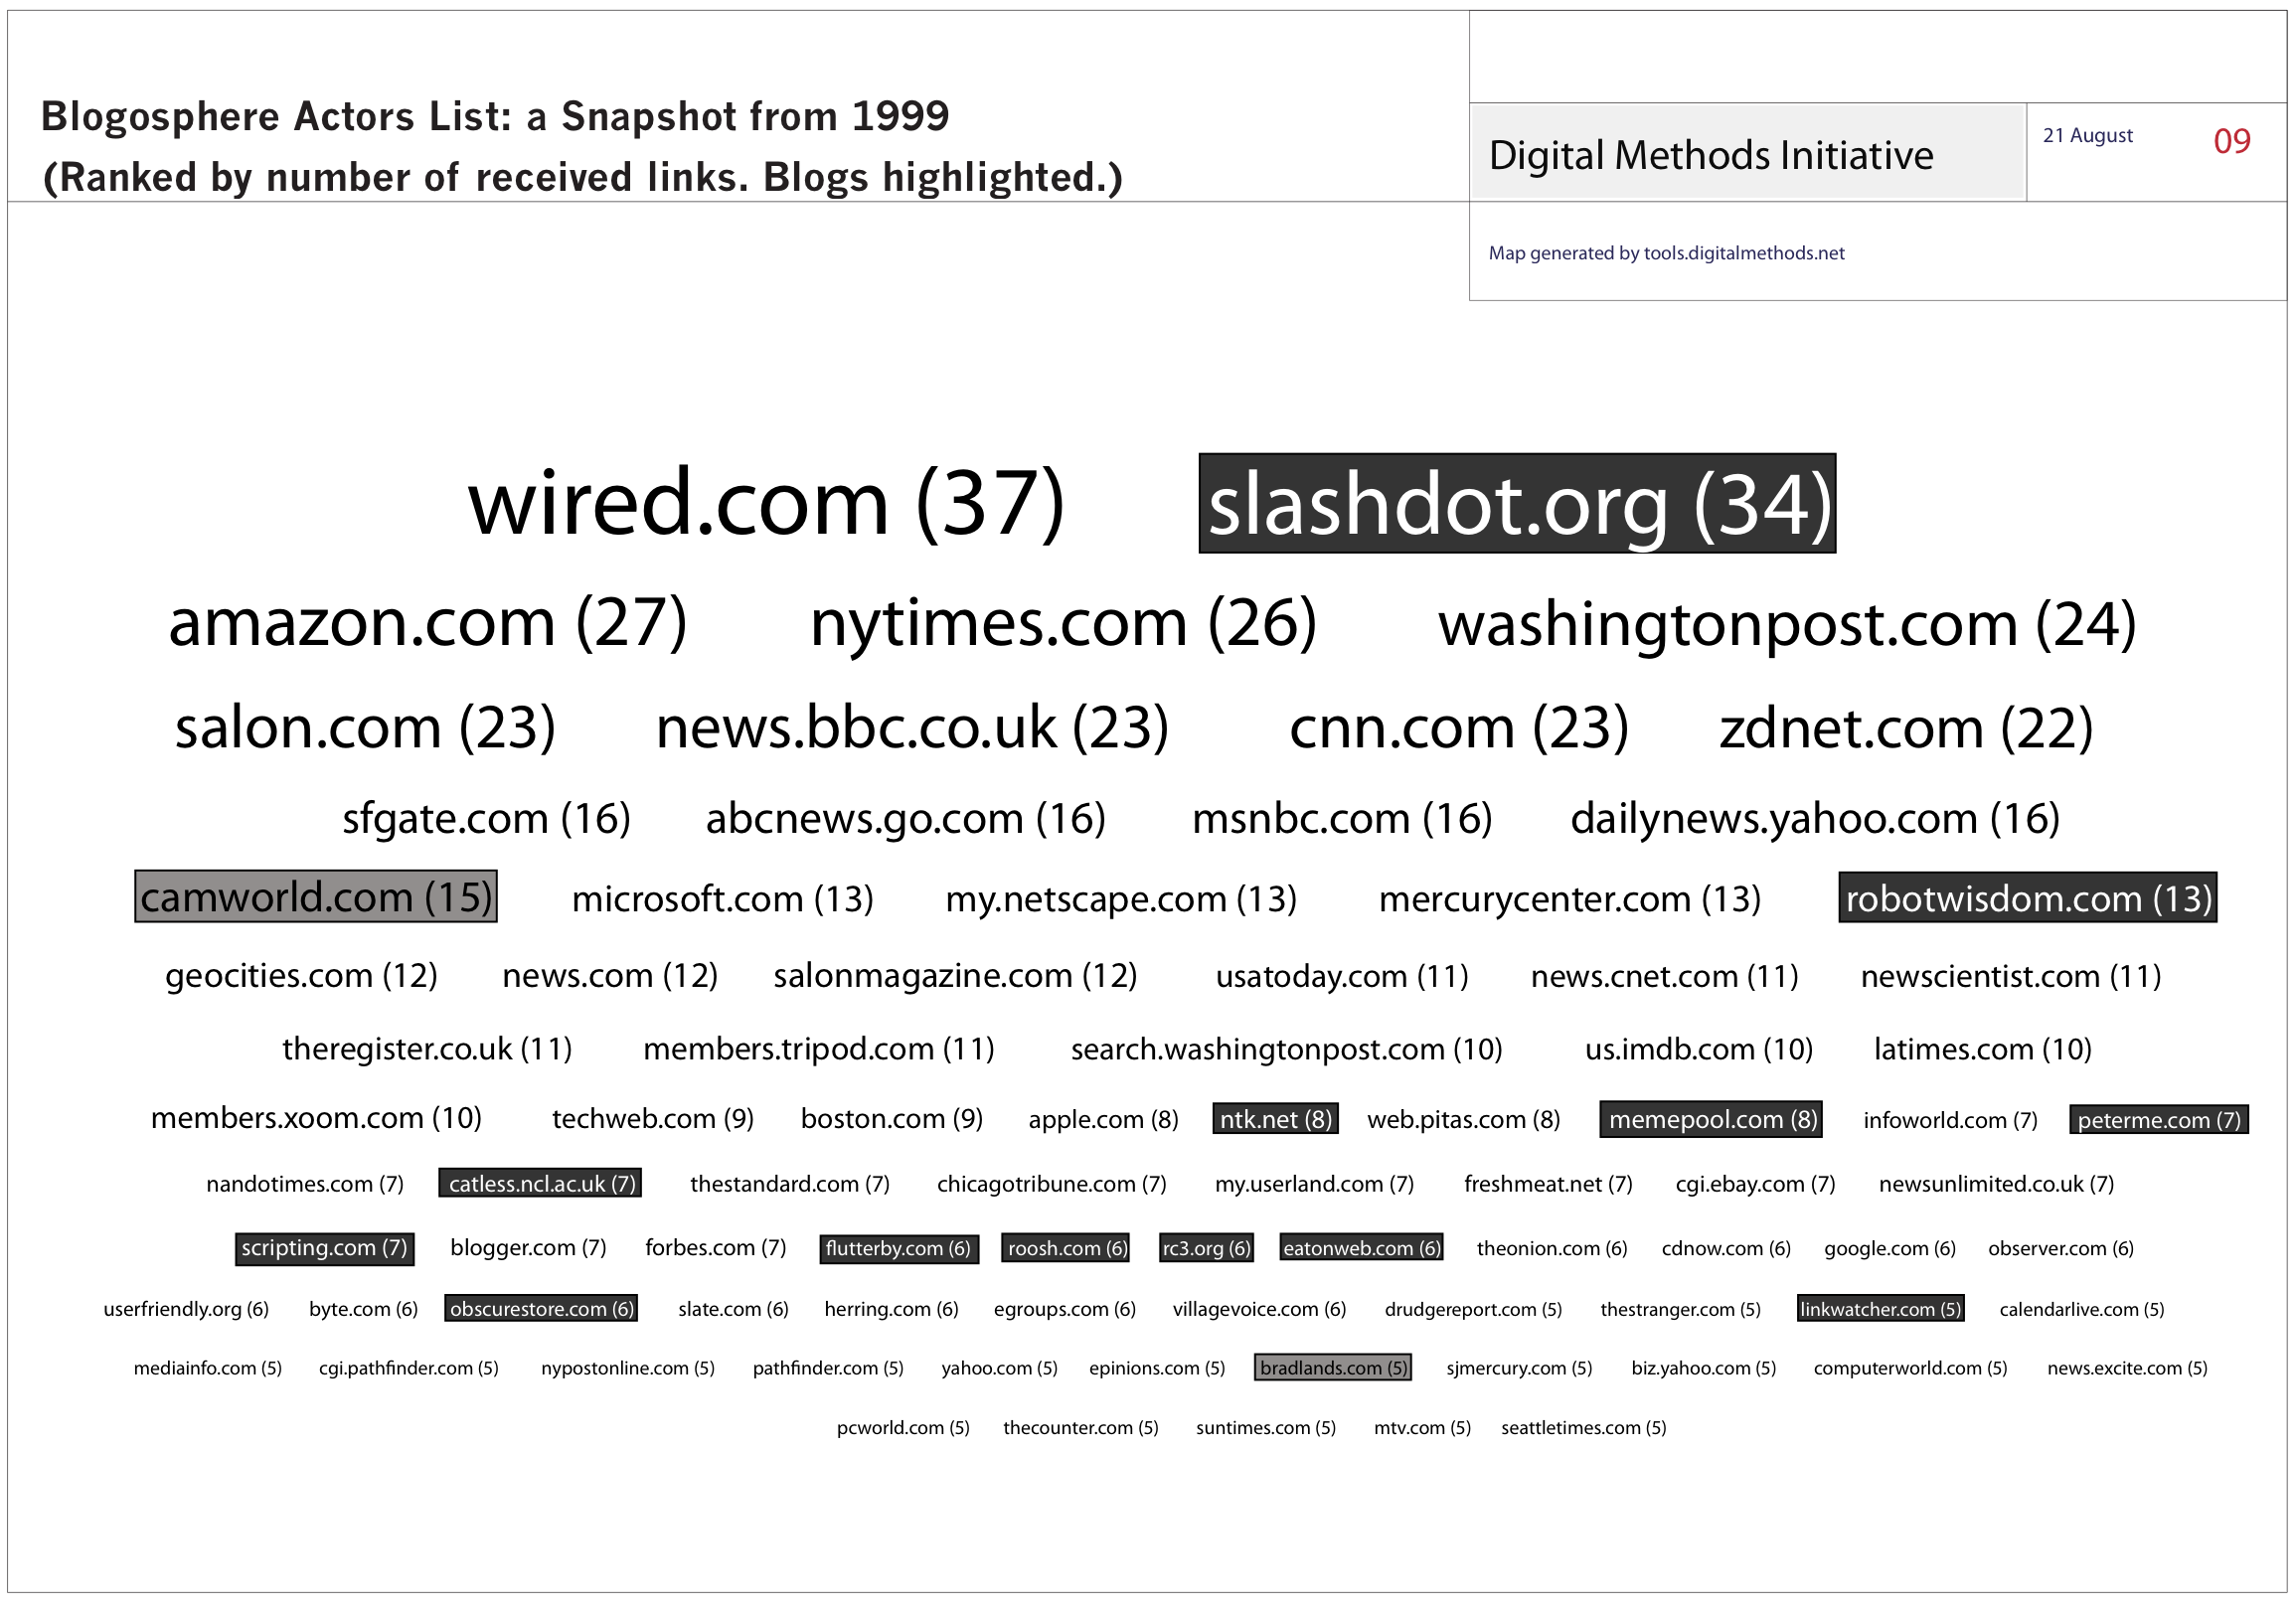 Blogosphere_Actors_List__a_Snapshot_from_1999v1.png